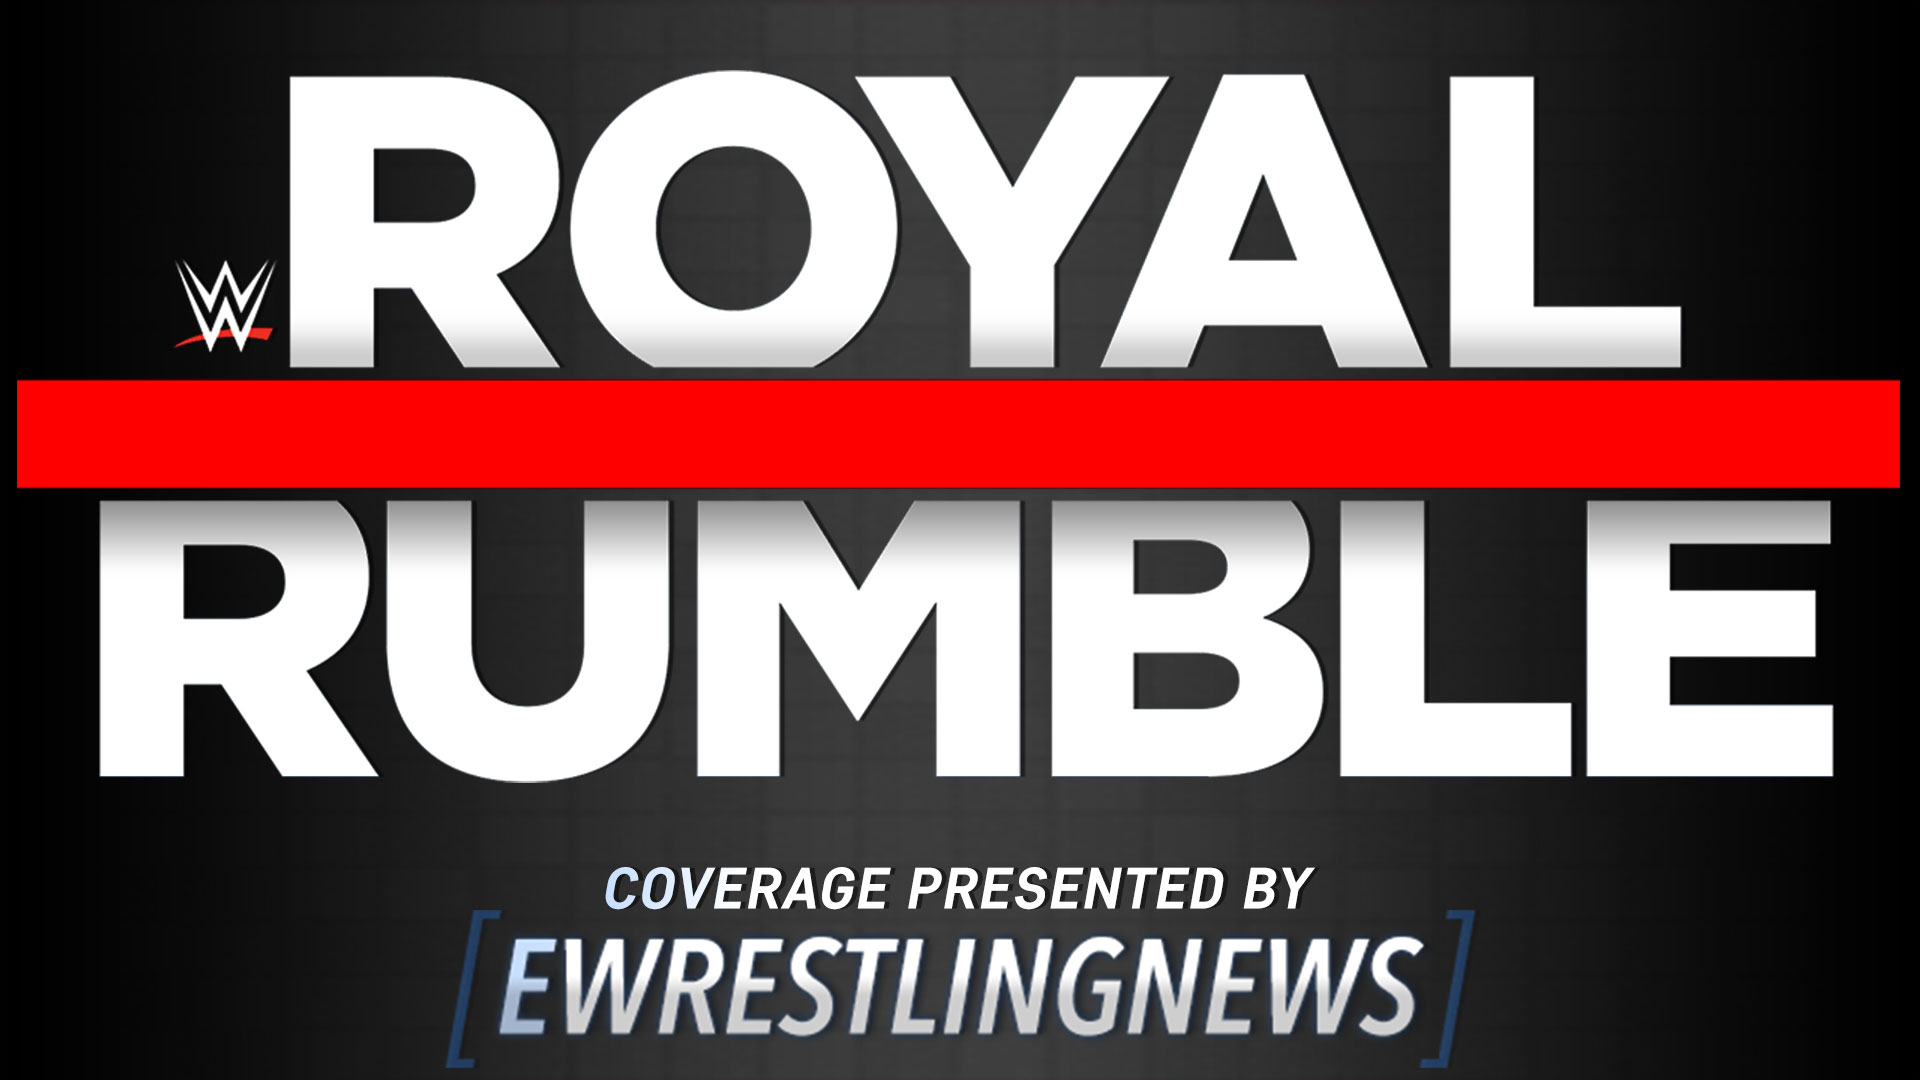 WWE Announces Tampa, FL as the Venue for the 2024 Royal Rumble Pay-Per-View Event